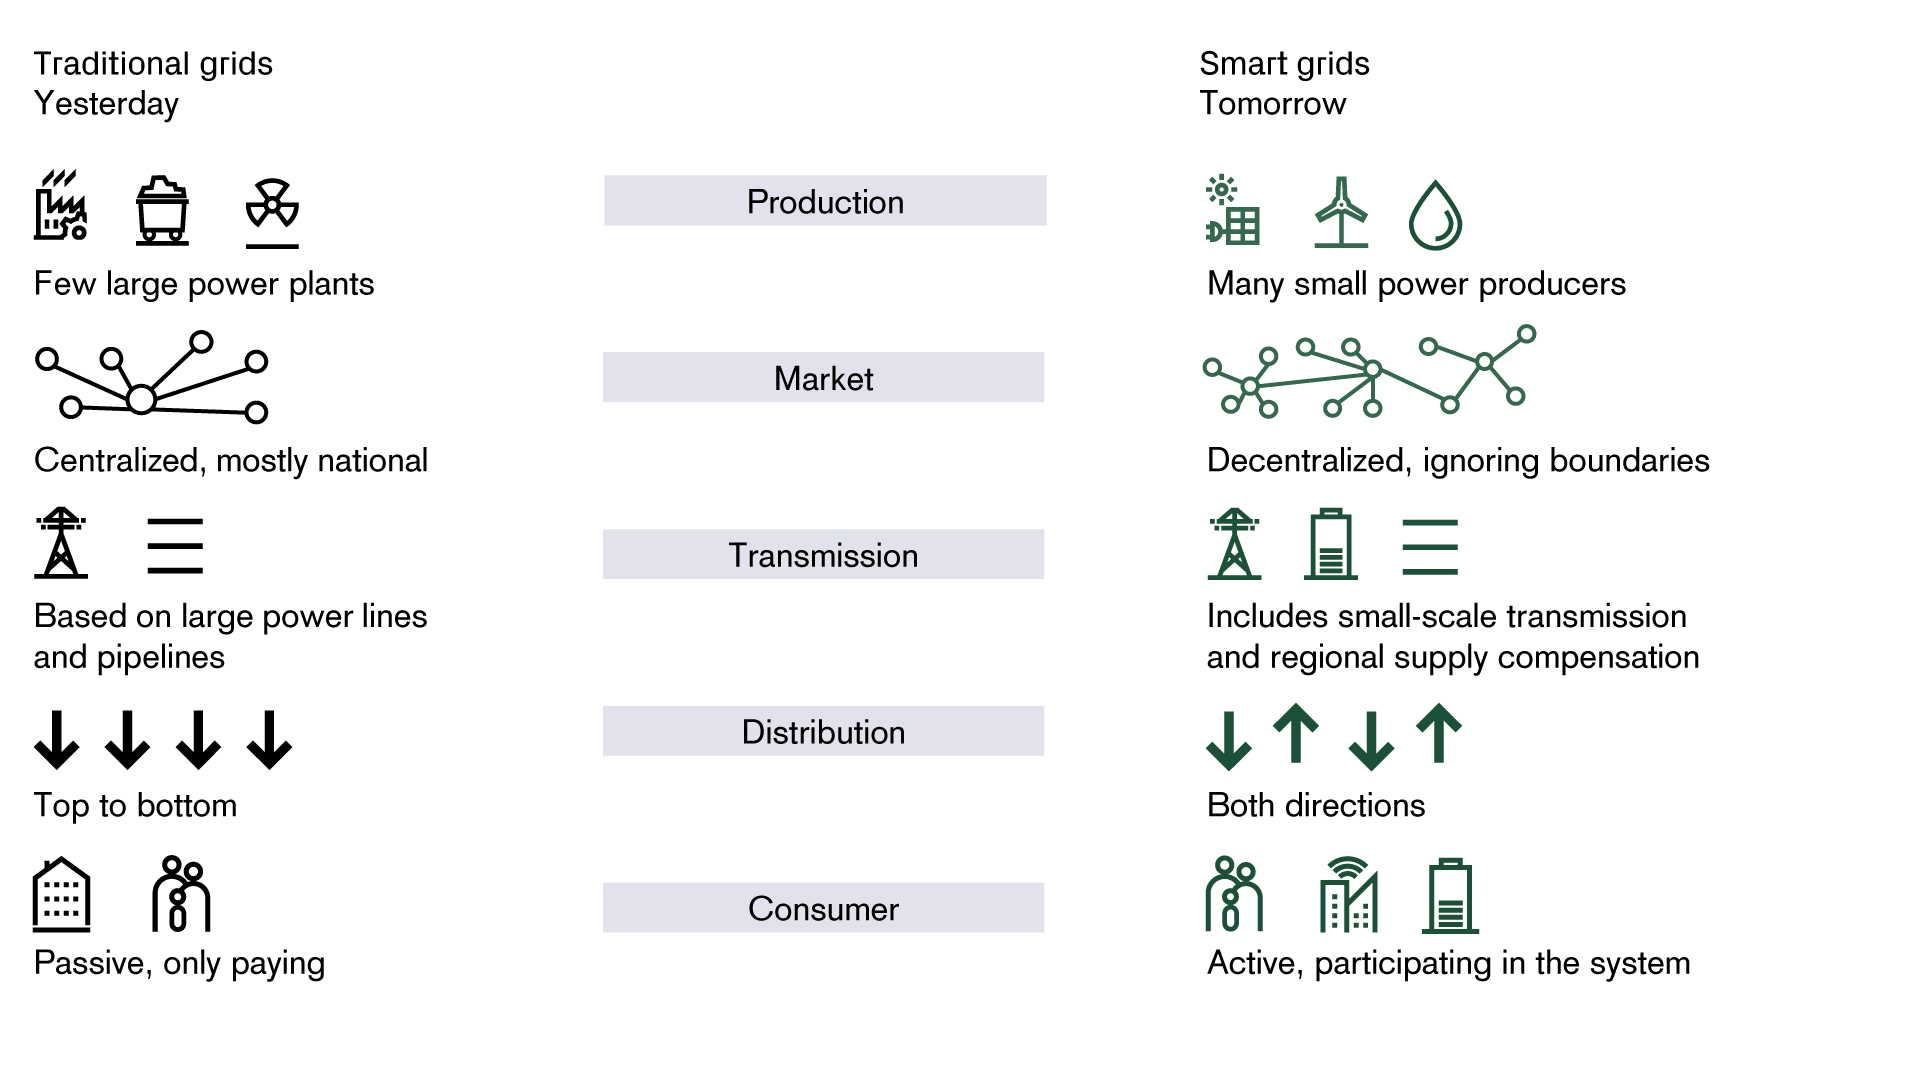 main differences between traditional power grids and smart grids.